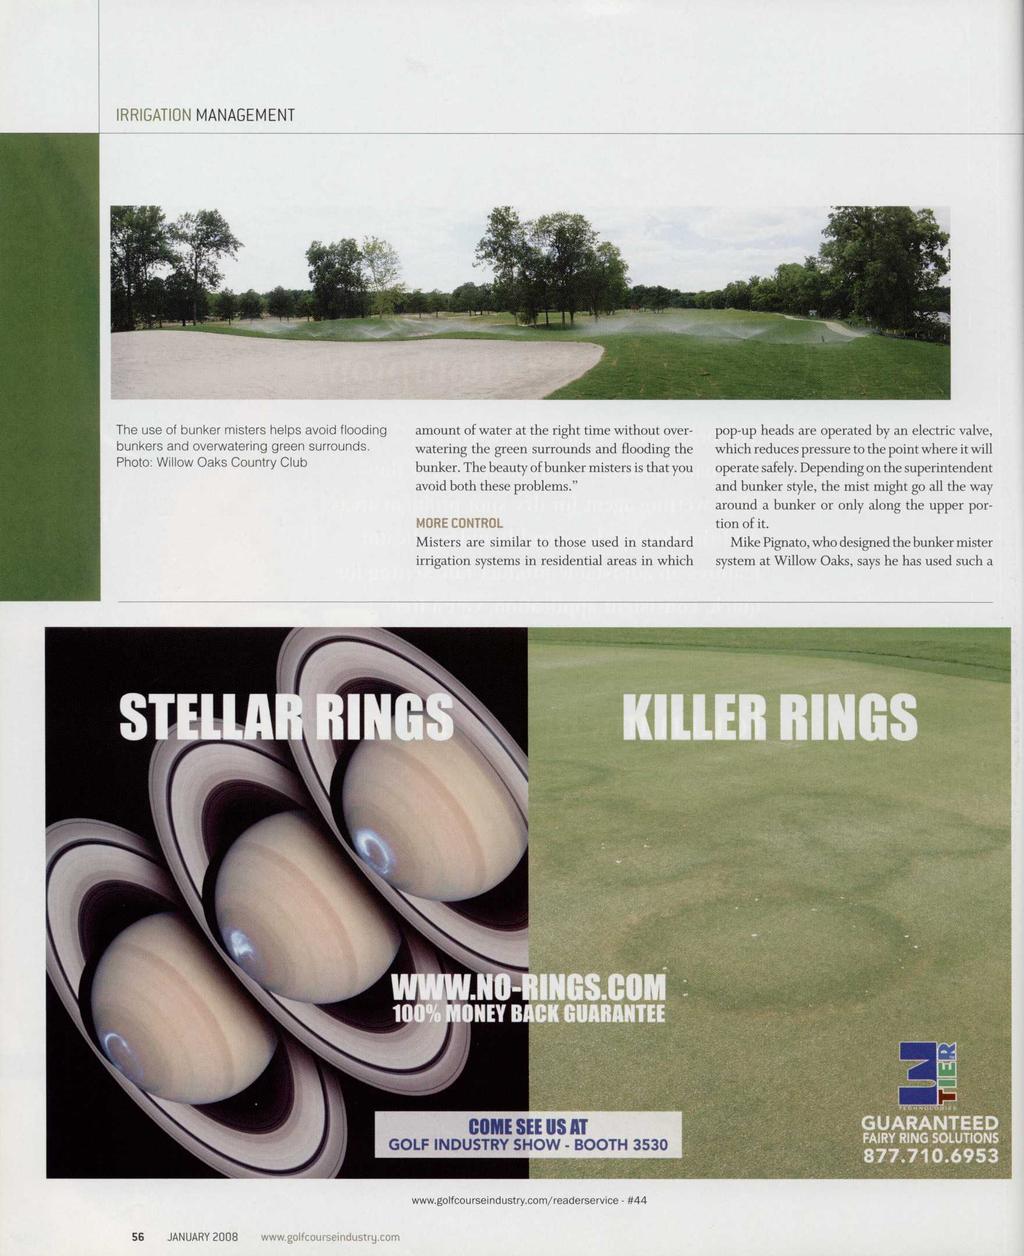 The use of bunker misters helps avoid flooding bunkers and overwatering green surrounds.